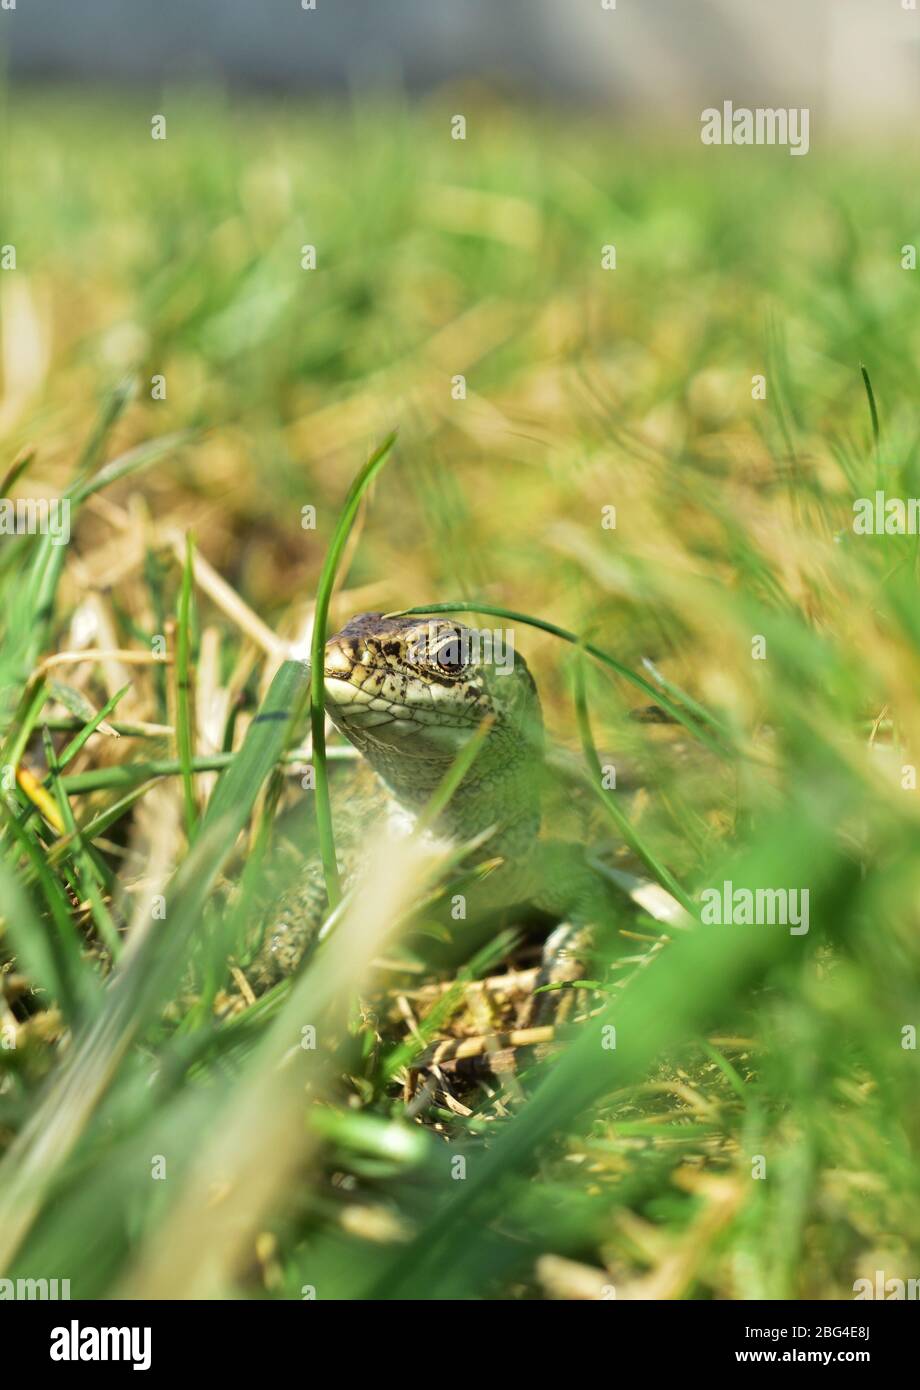 Sand lizard Lacerta agilis up close in the grass, vertical Stock Photo